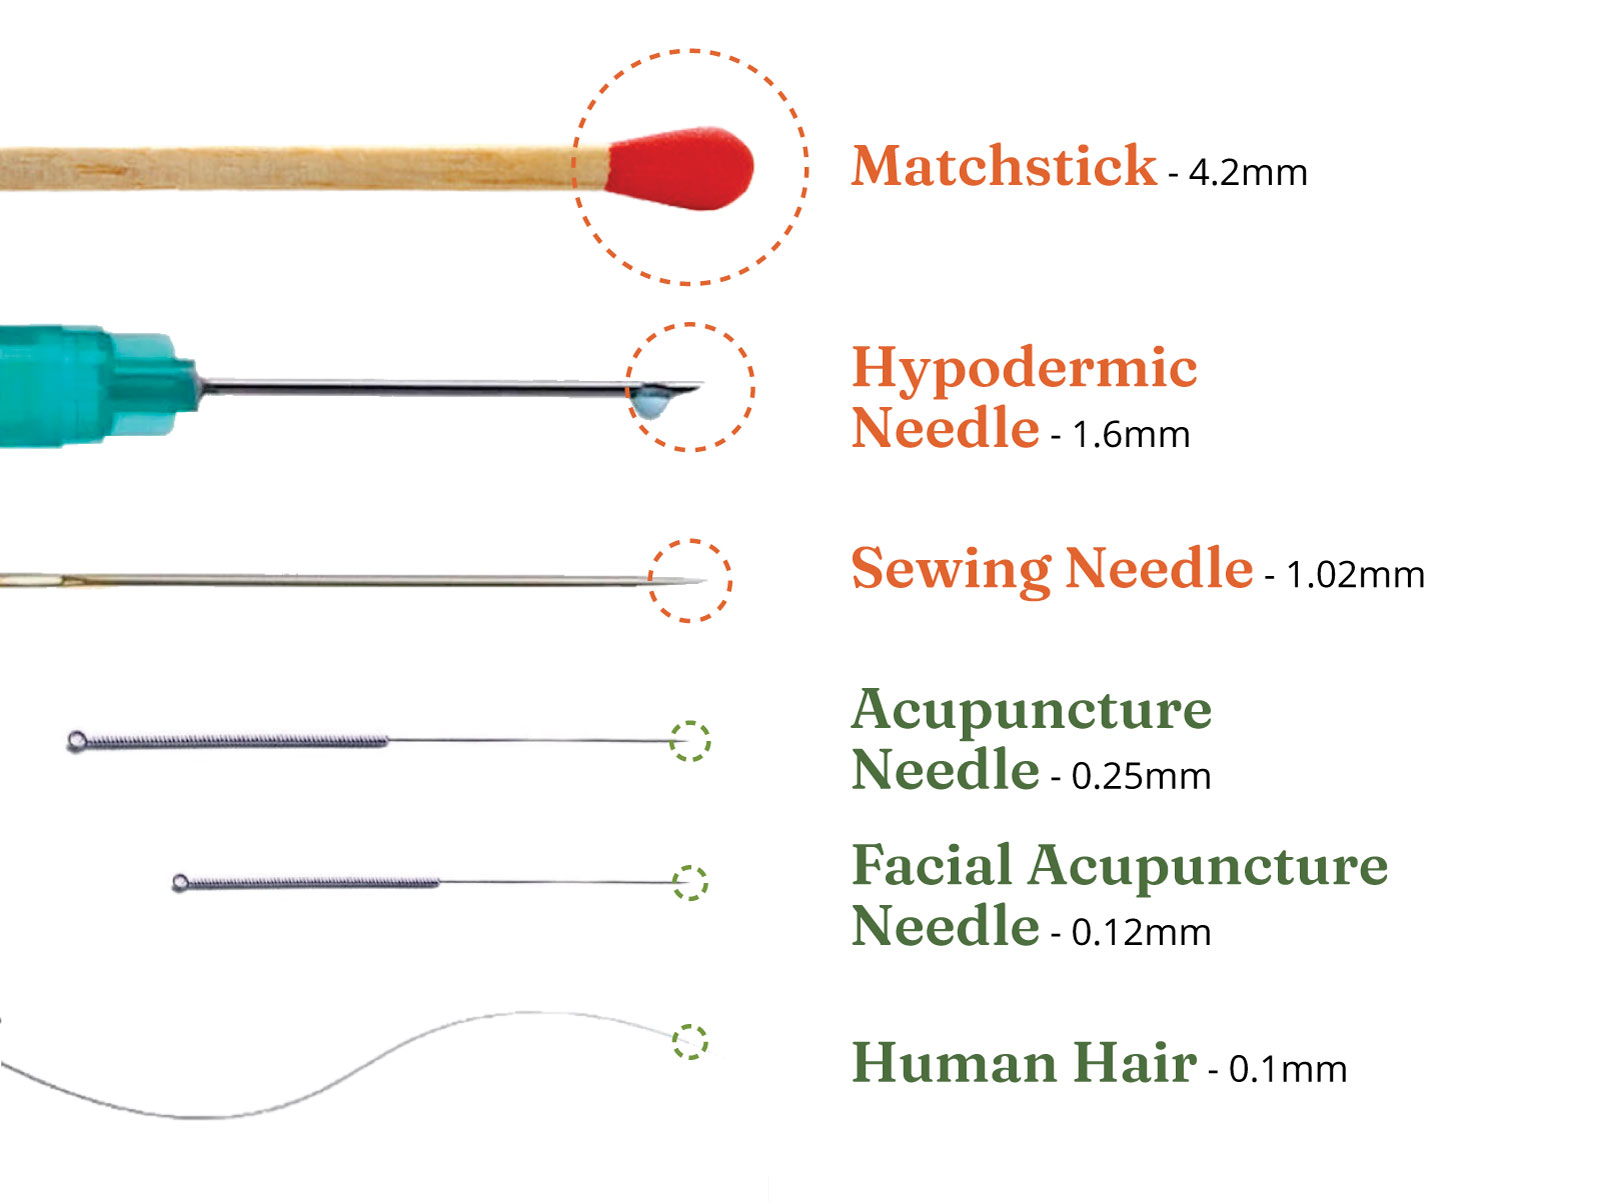 A graphical depiction showing the various of objects and needles to show how thin acupuncture needles are